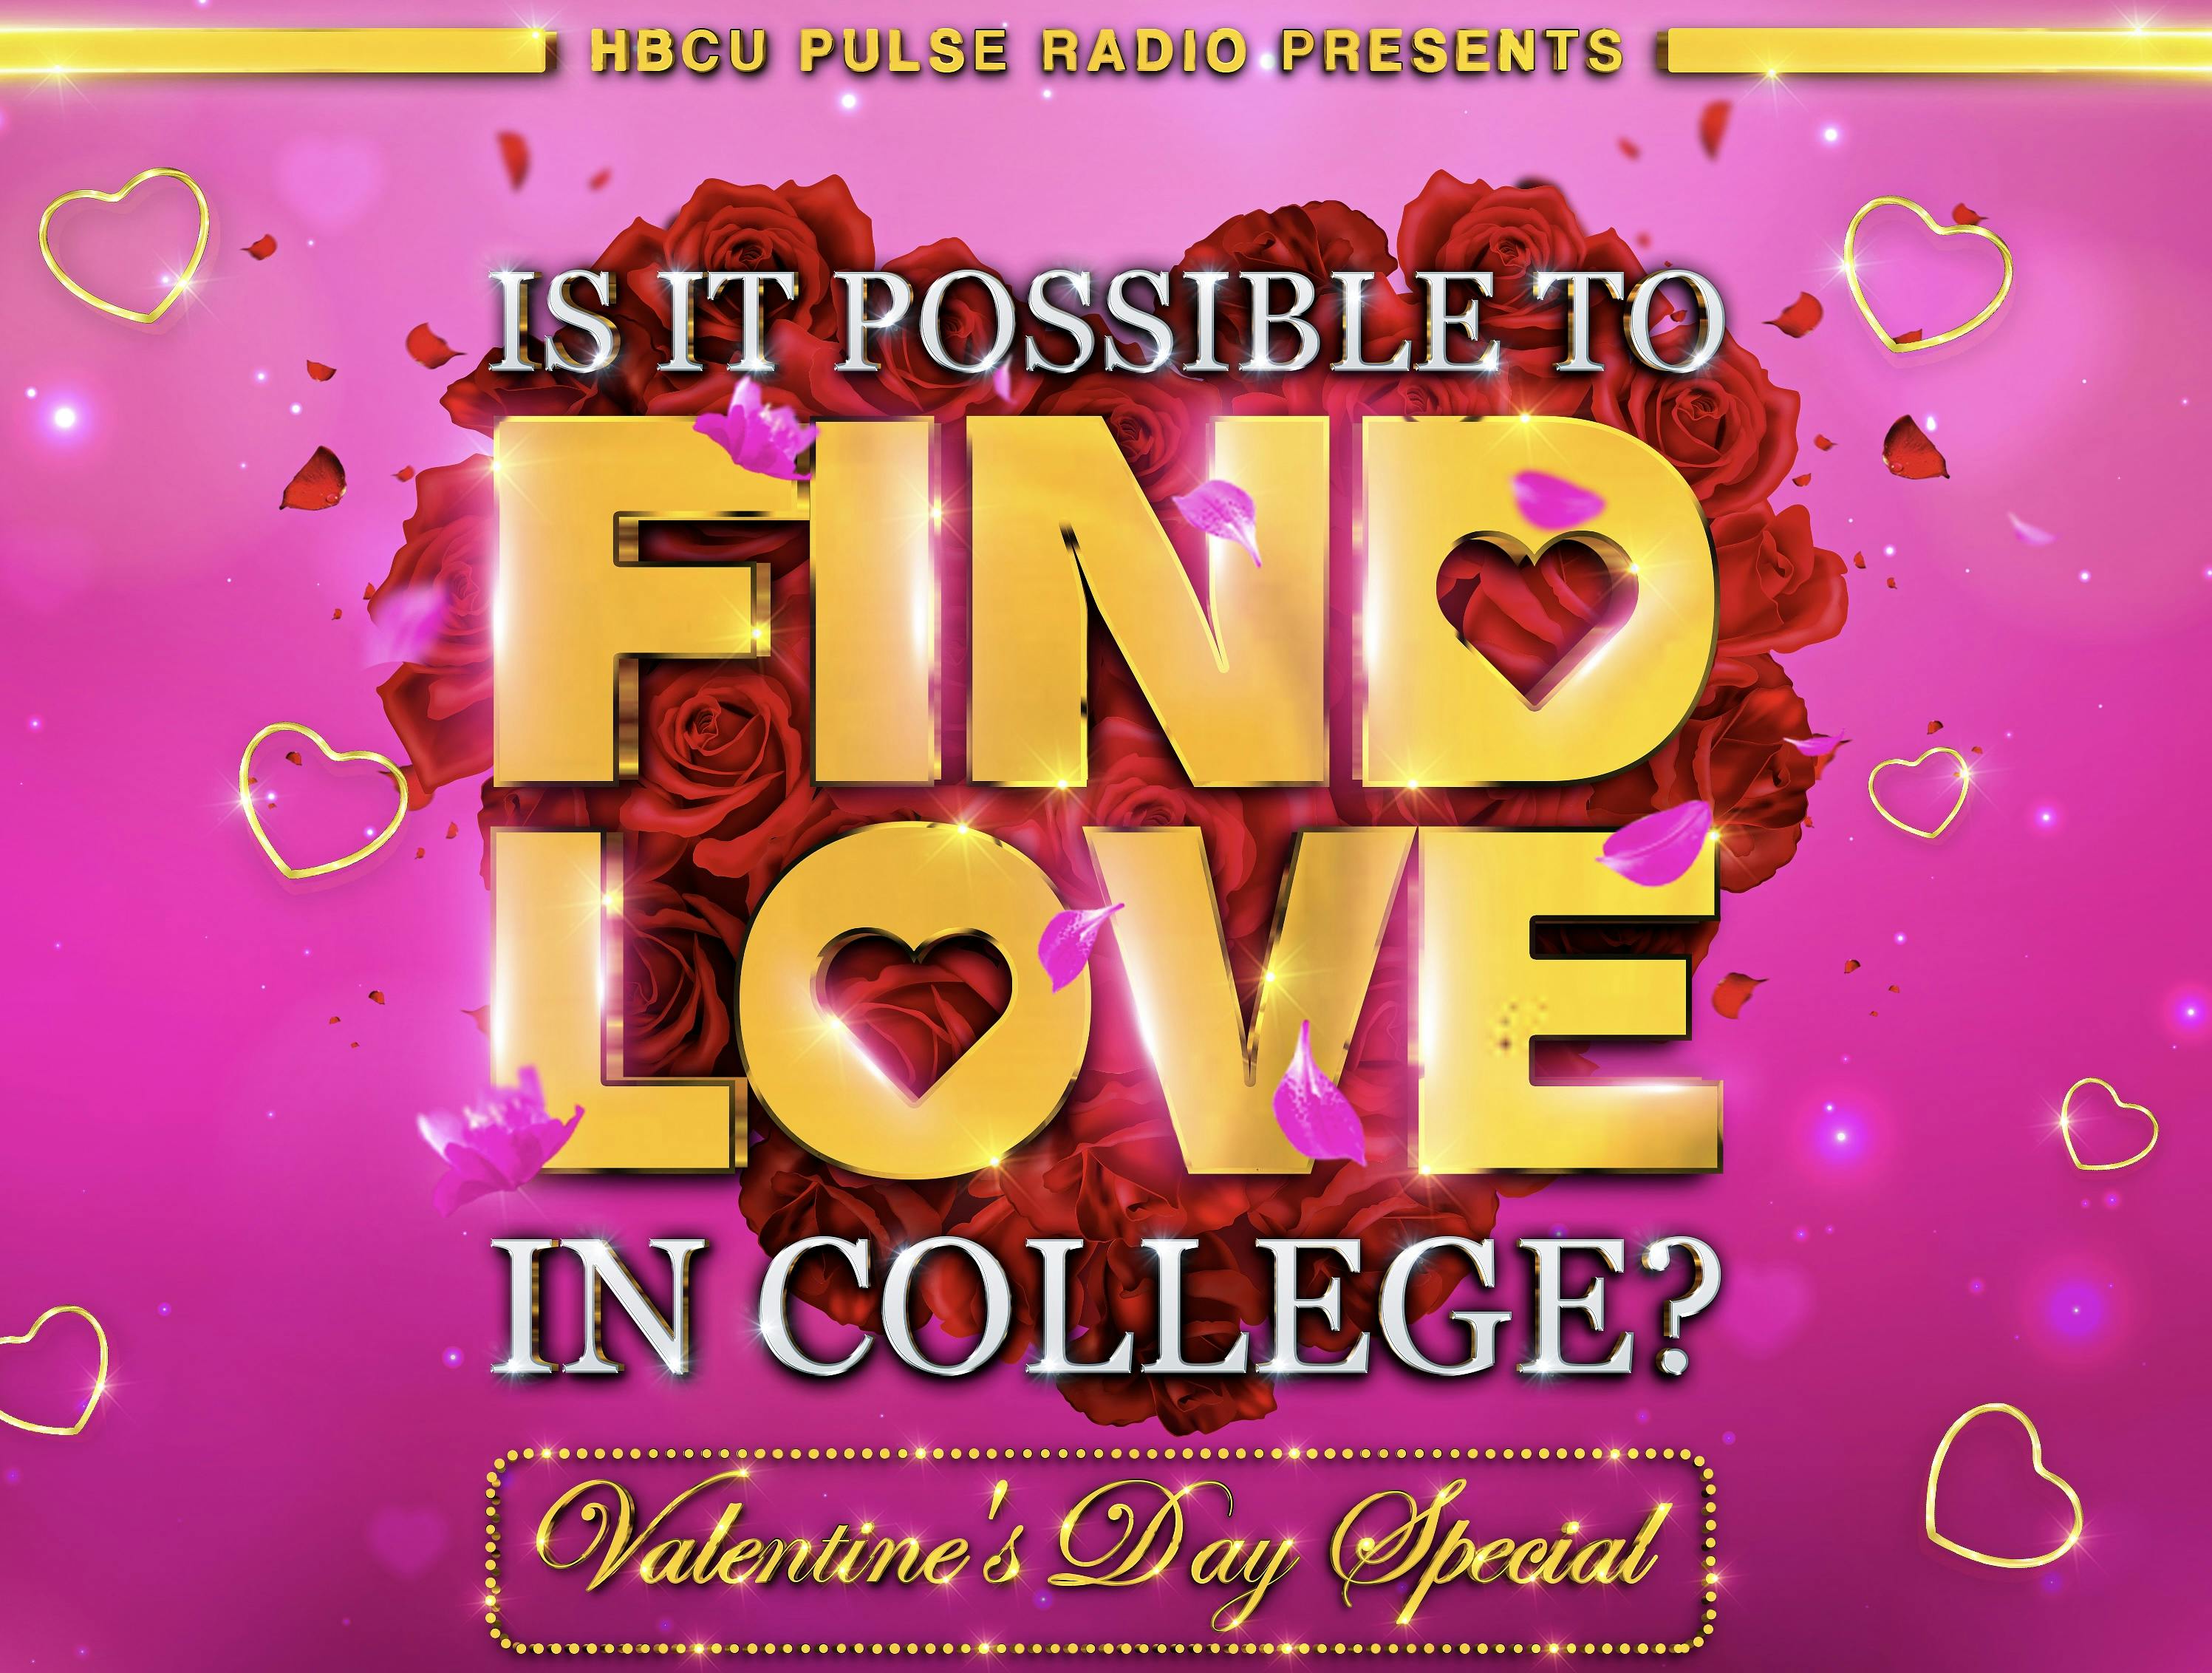 Is It Possible To Find True Love In College (HBCU Pulse Valentine's Day Special)